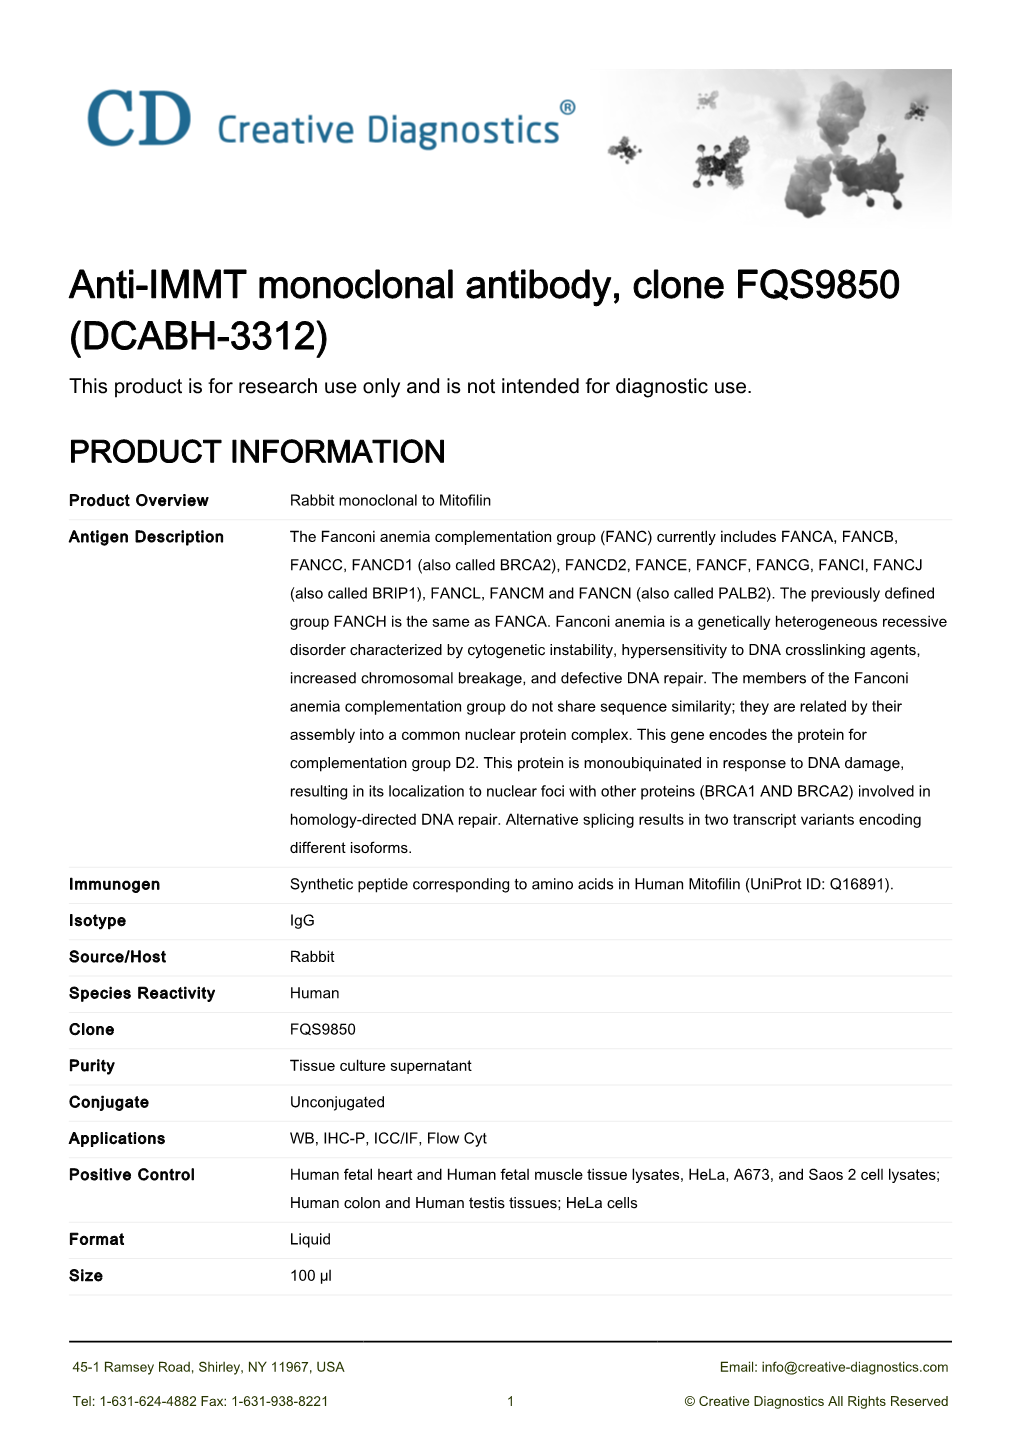 Anti-IMMT Monoclonal Antibody, Clone FQS9850 (DCABH-3312) This Product Is for Research Use Only and Is Not Intended for Diagnostic Use